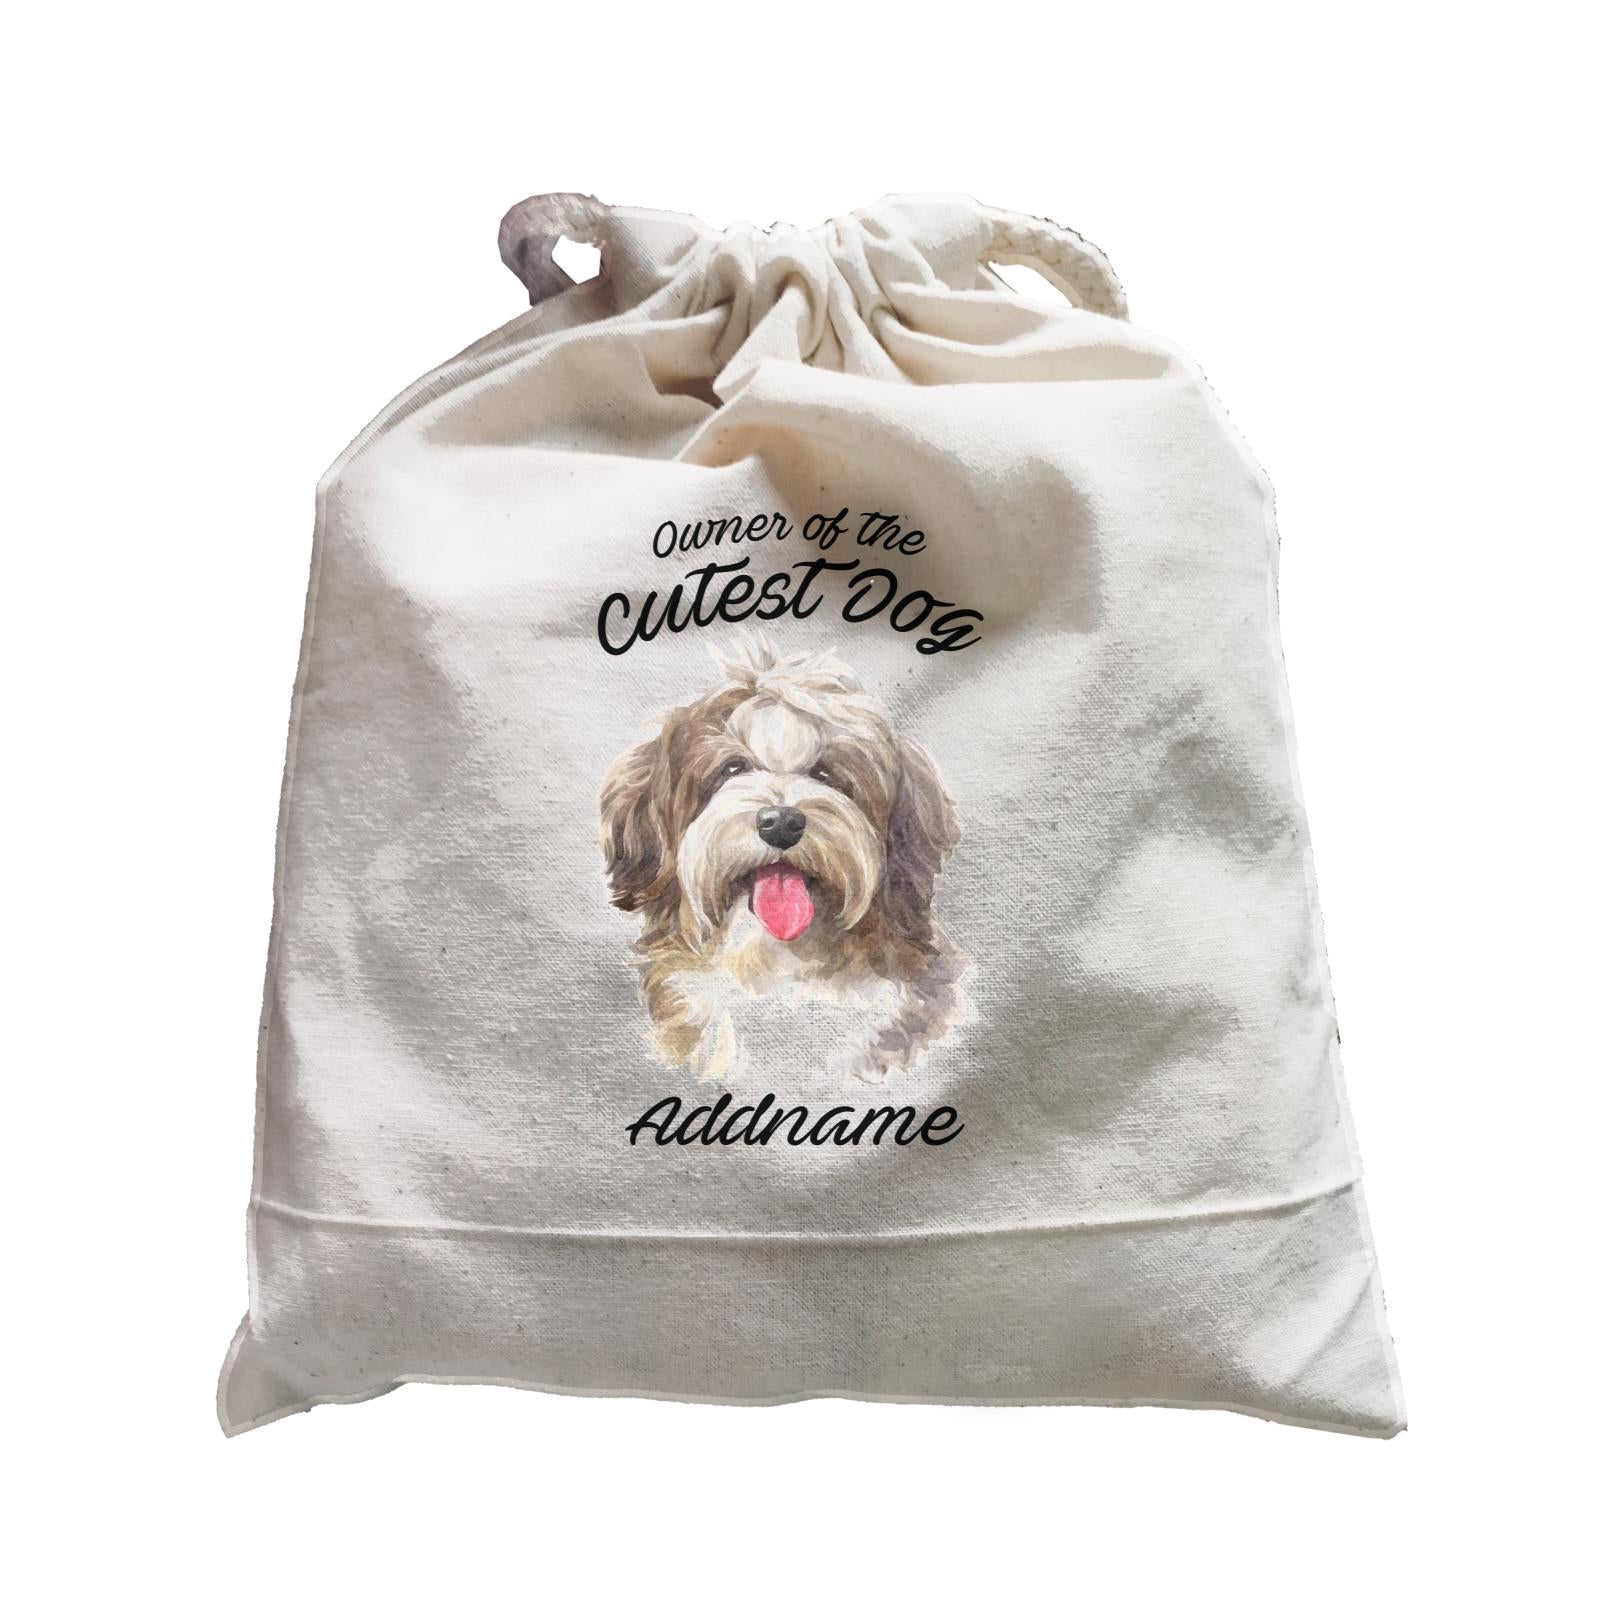 Watercolor Dog Owner Of The Cutest Dog Shaggy Havanese Addname Satchel